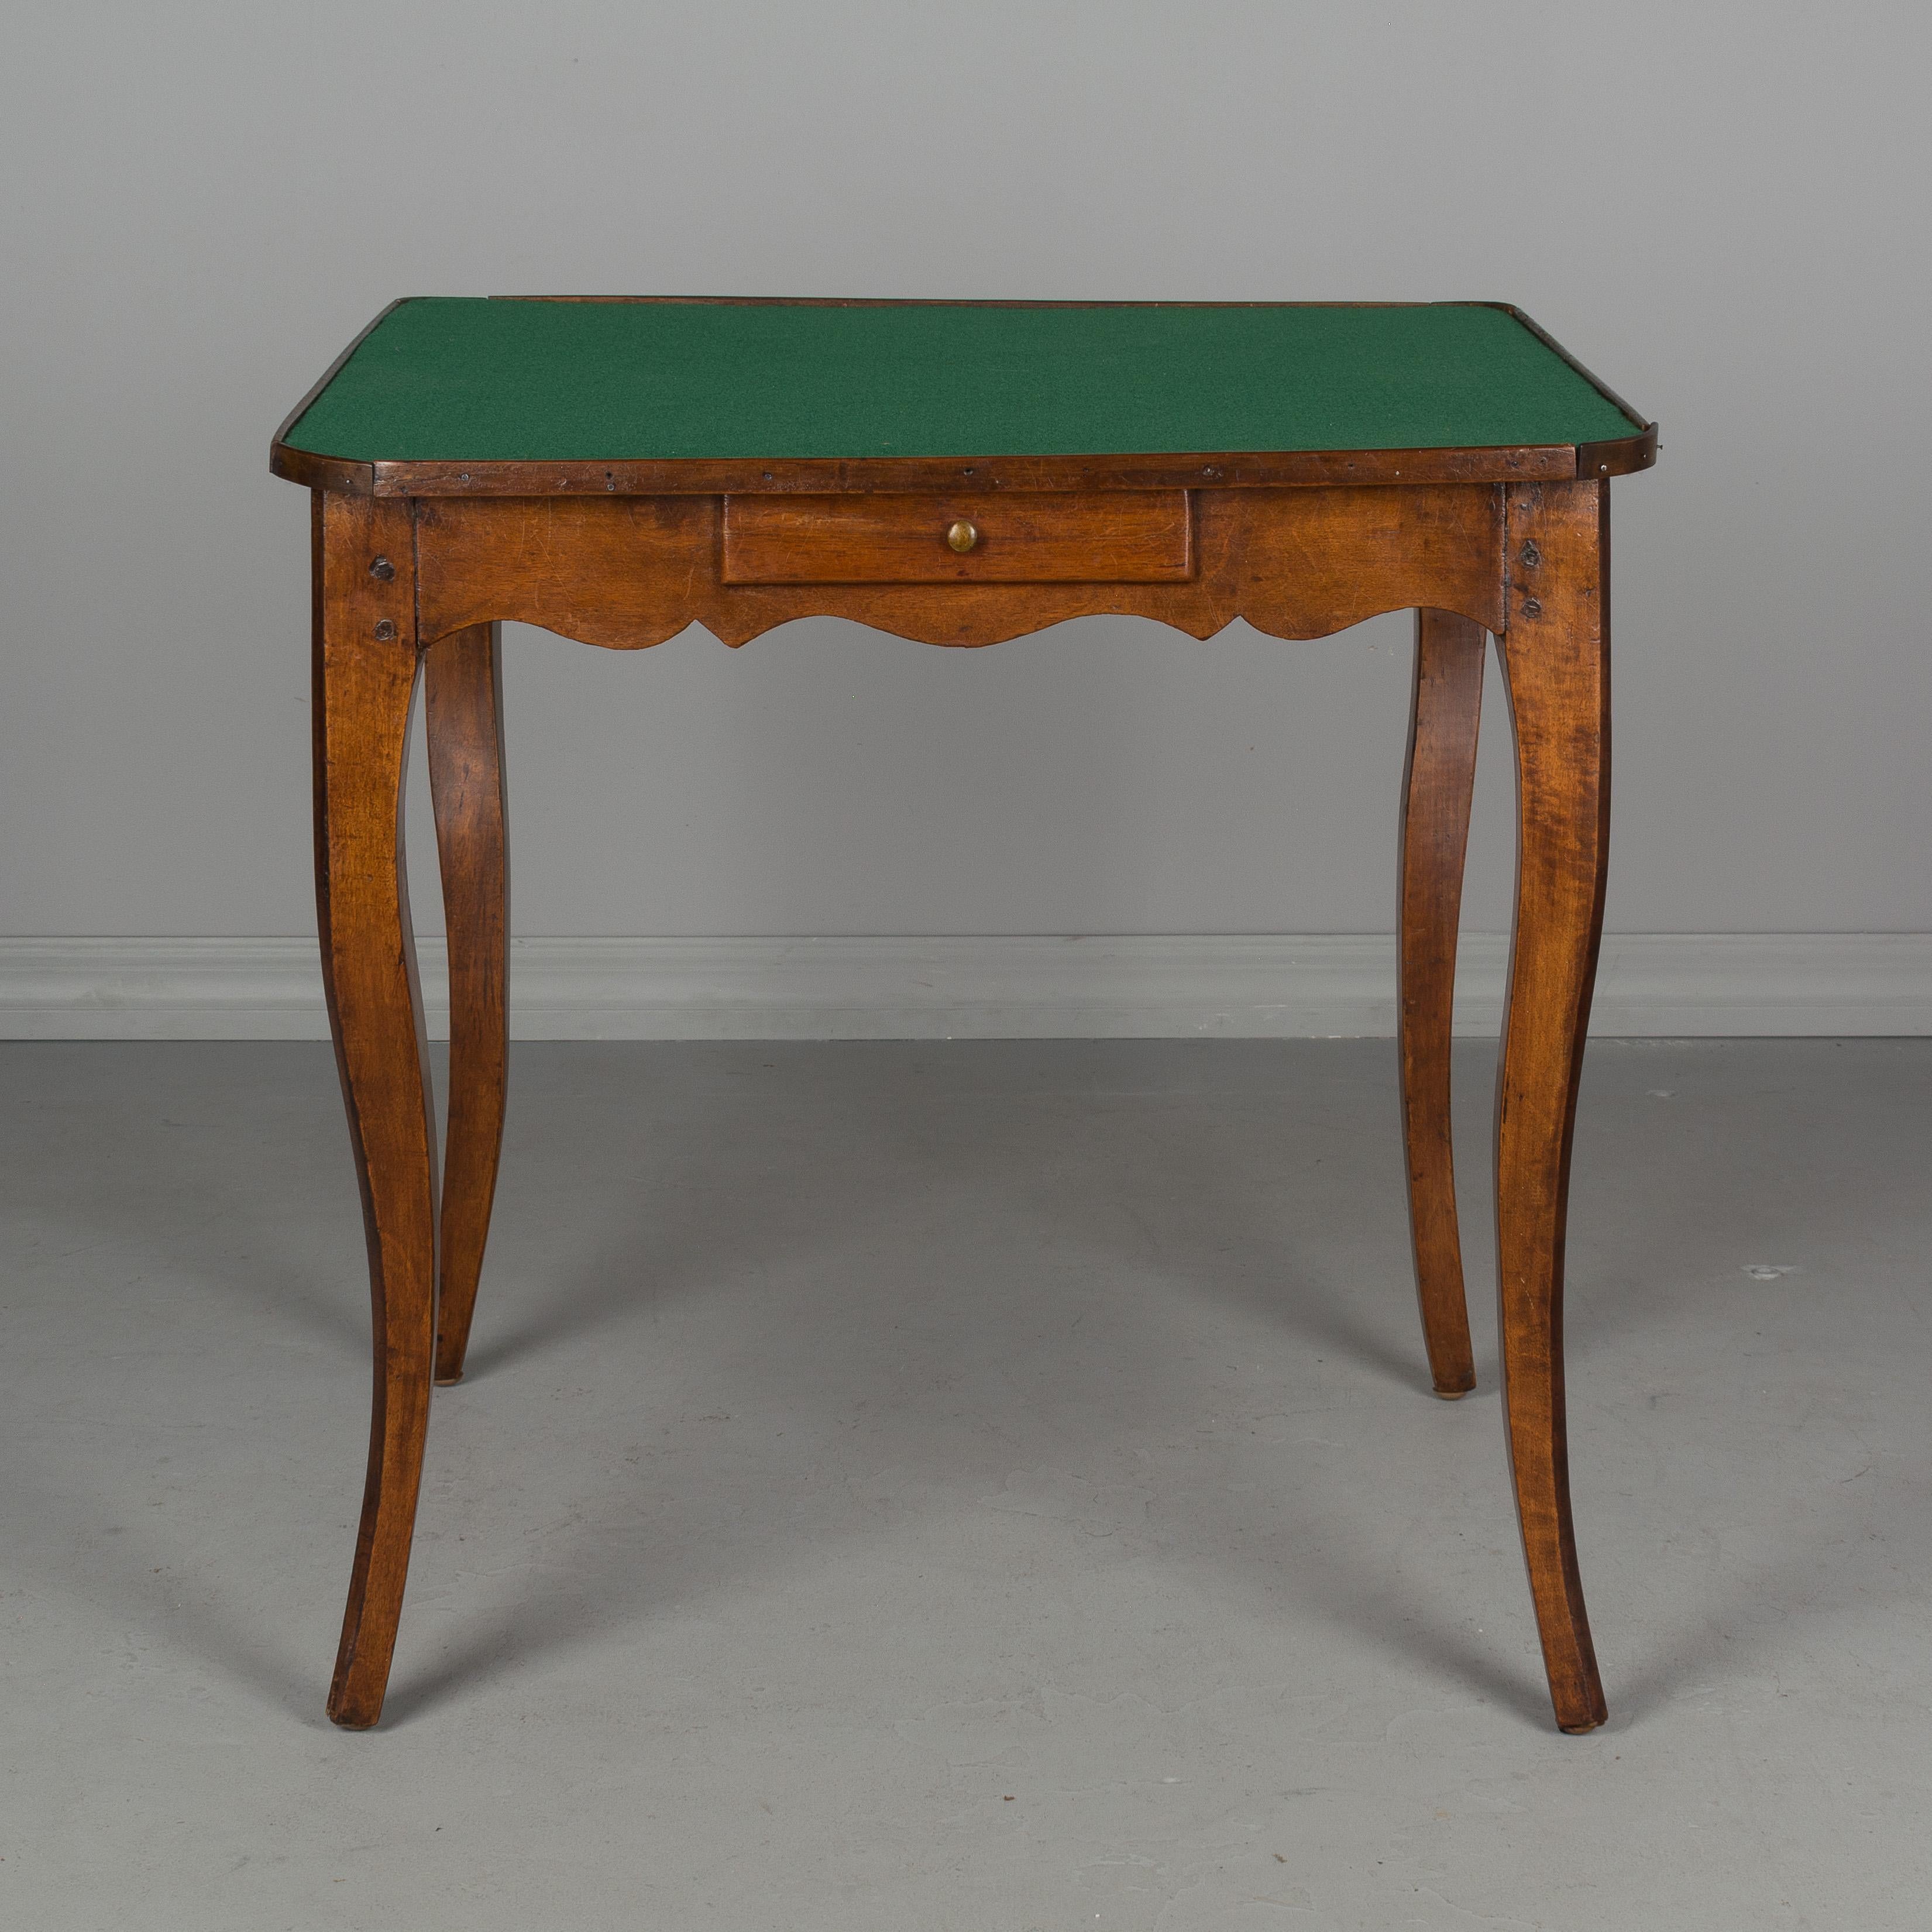 Hand-Crafted 19th Century French Game Table